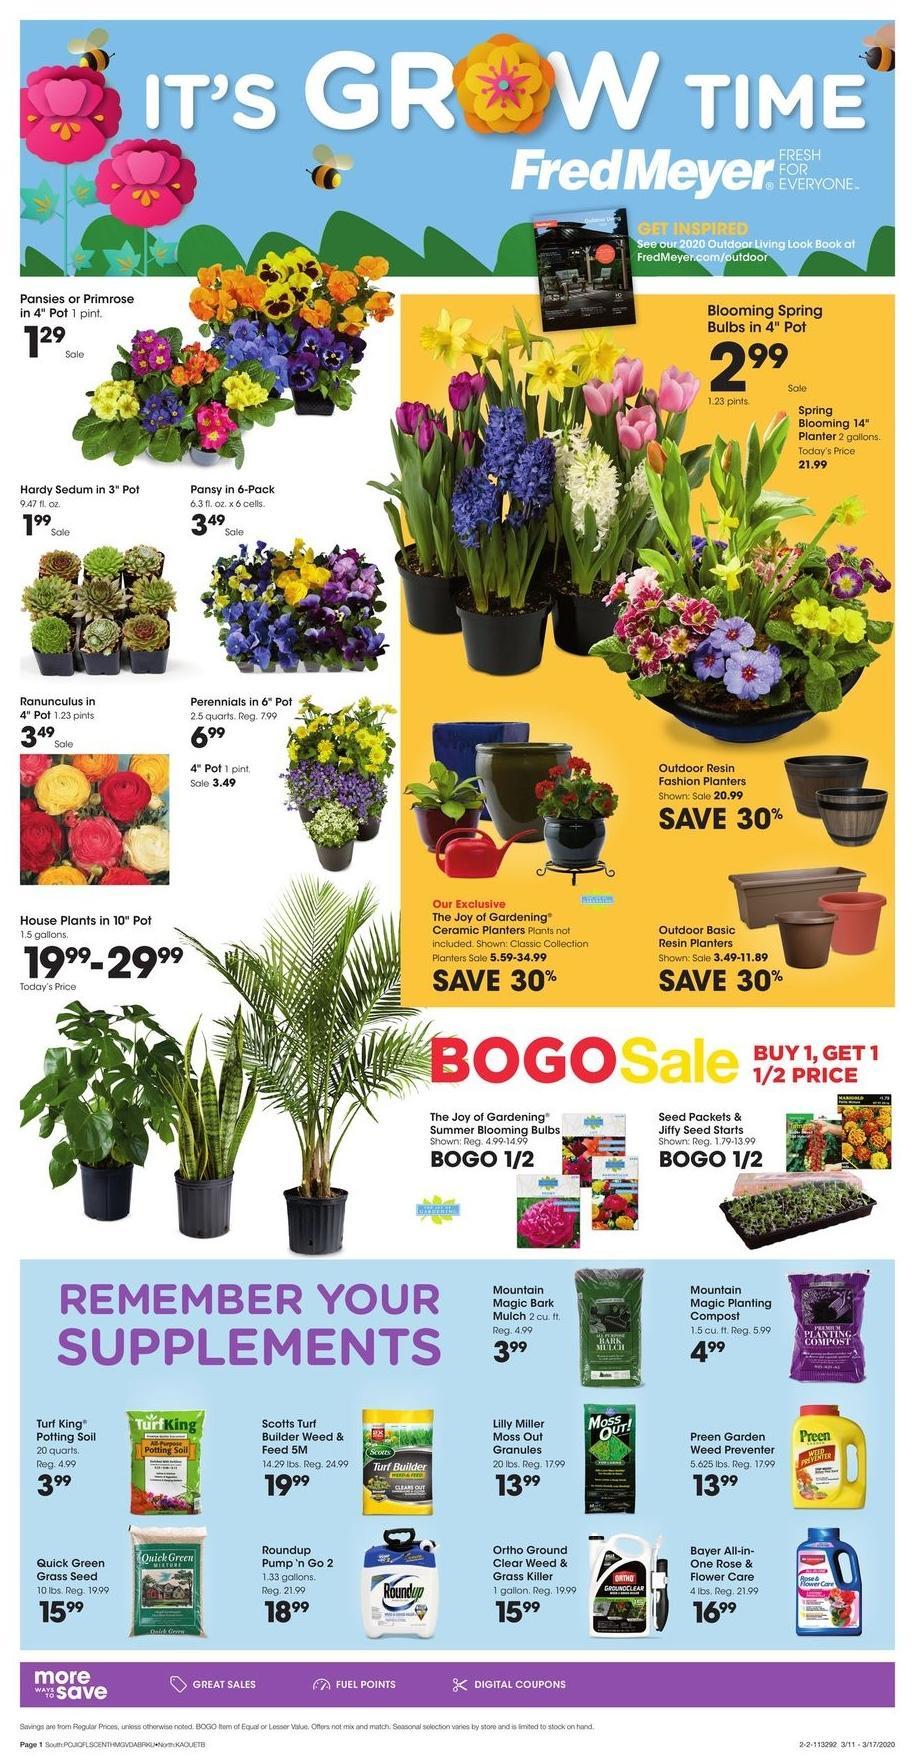 Fred Meyer Garden Weekly Ad & Specials from March 11